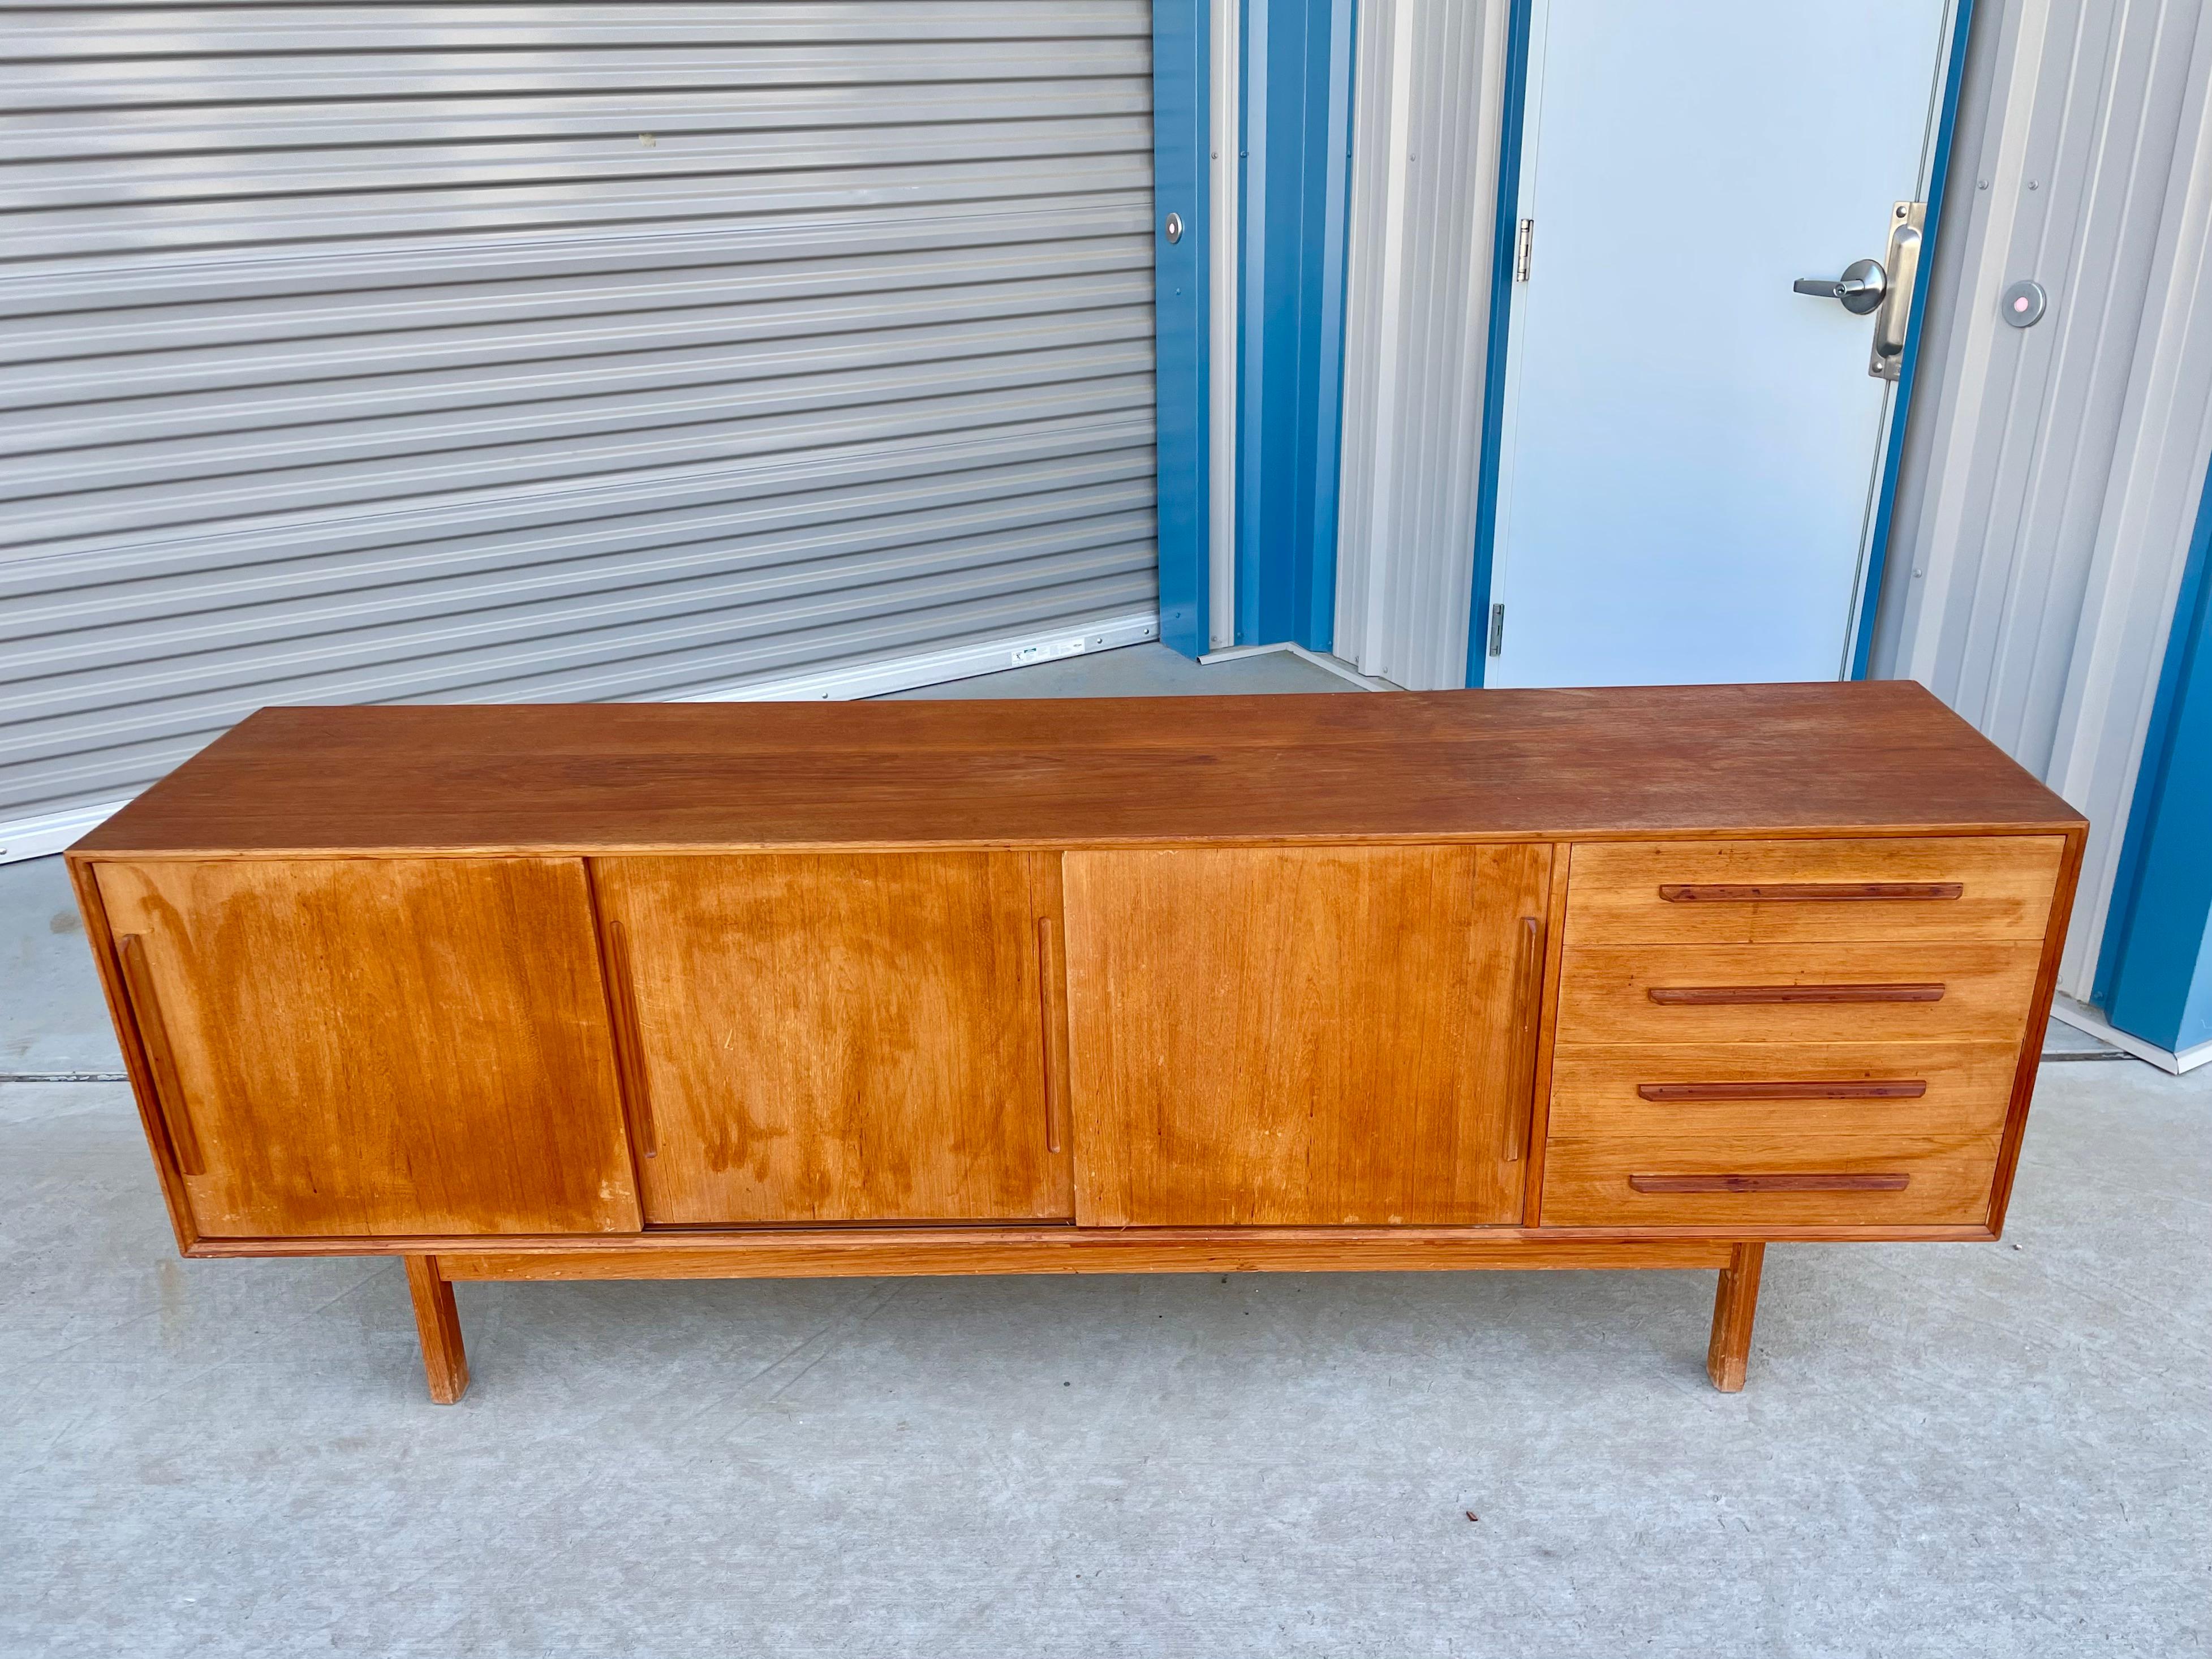 Danish Modern Teak Credenza In Good Condition For Sale In North Hollywood, CA